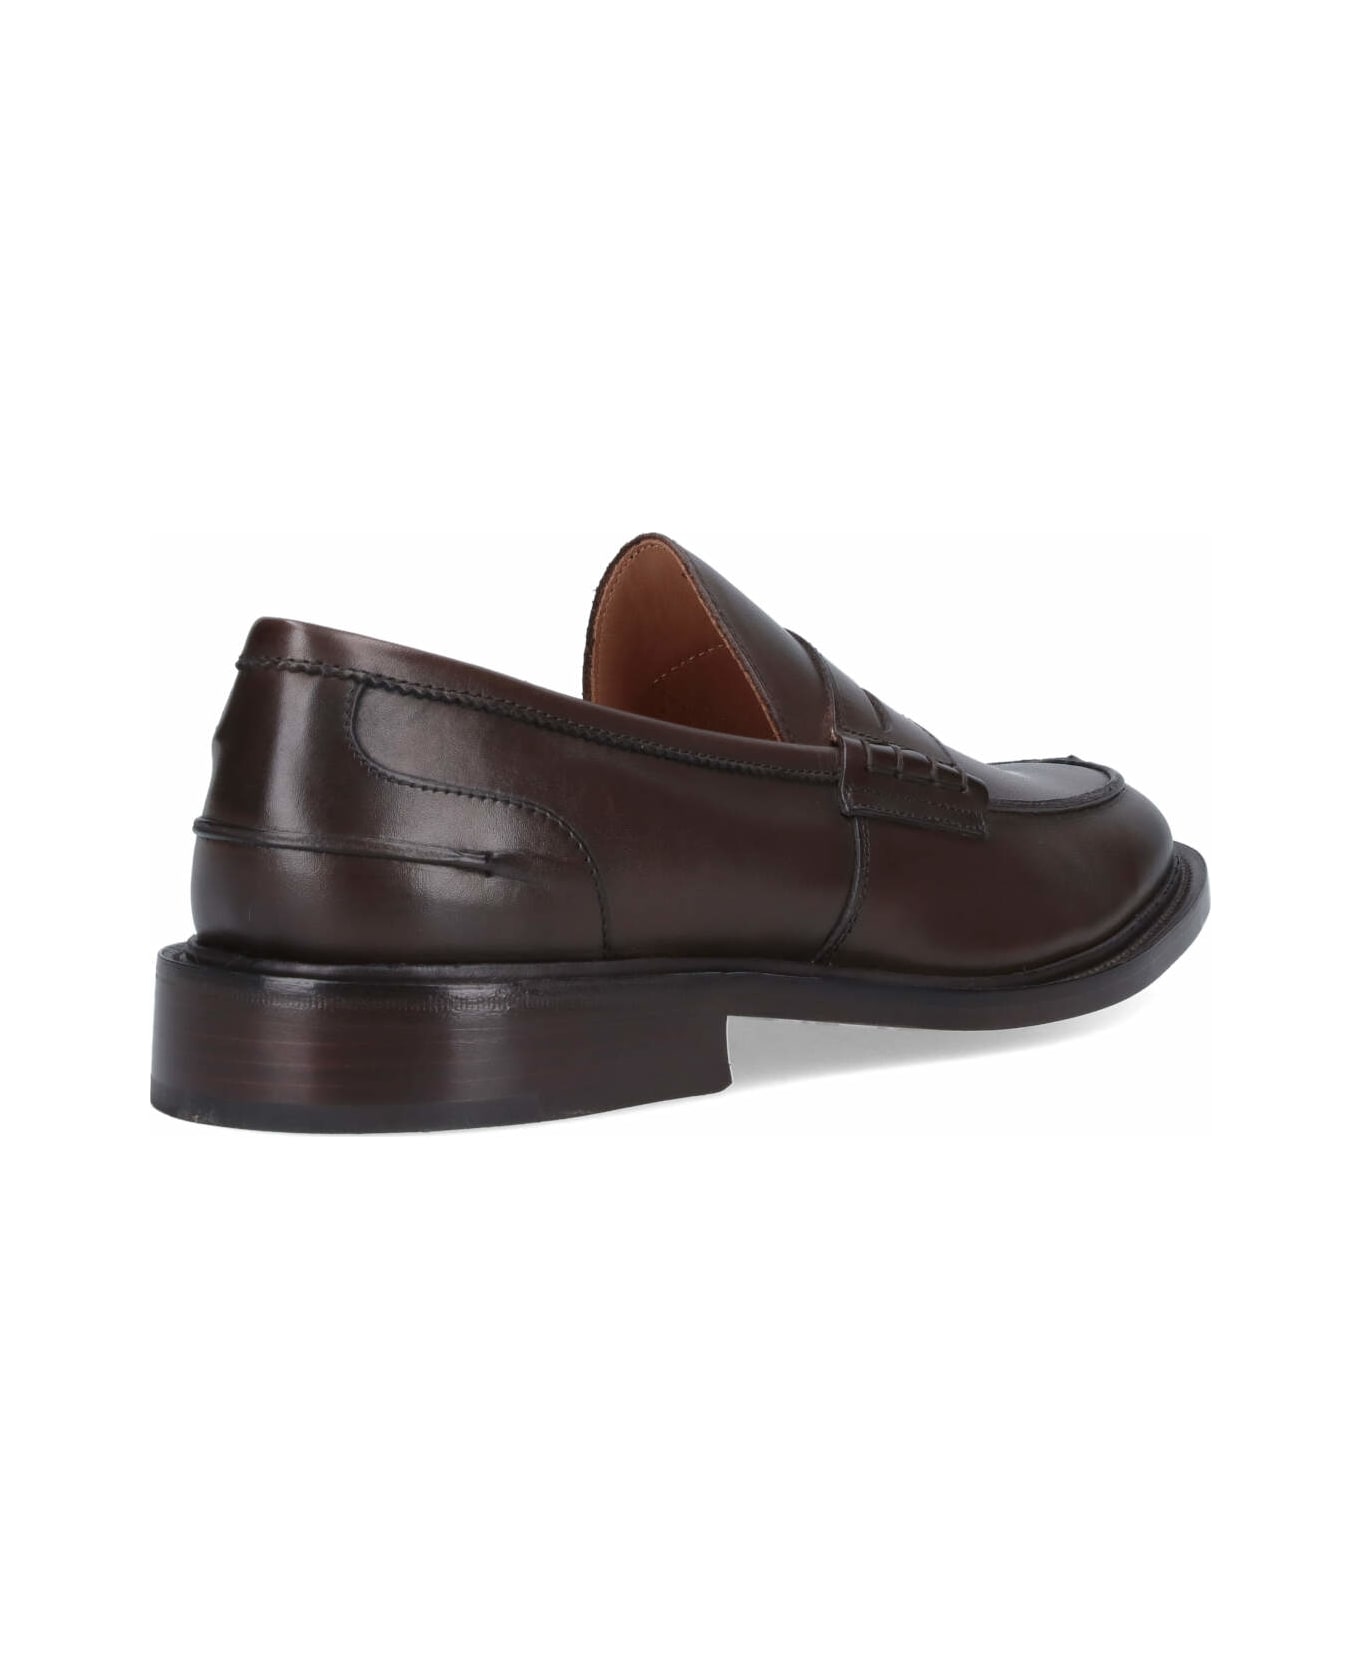 Tricker's 'james' Loafers - Brown